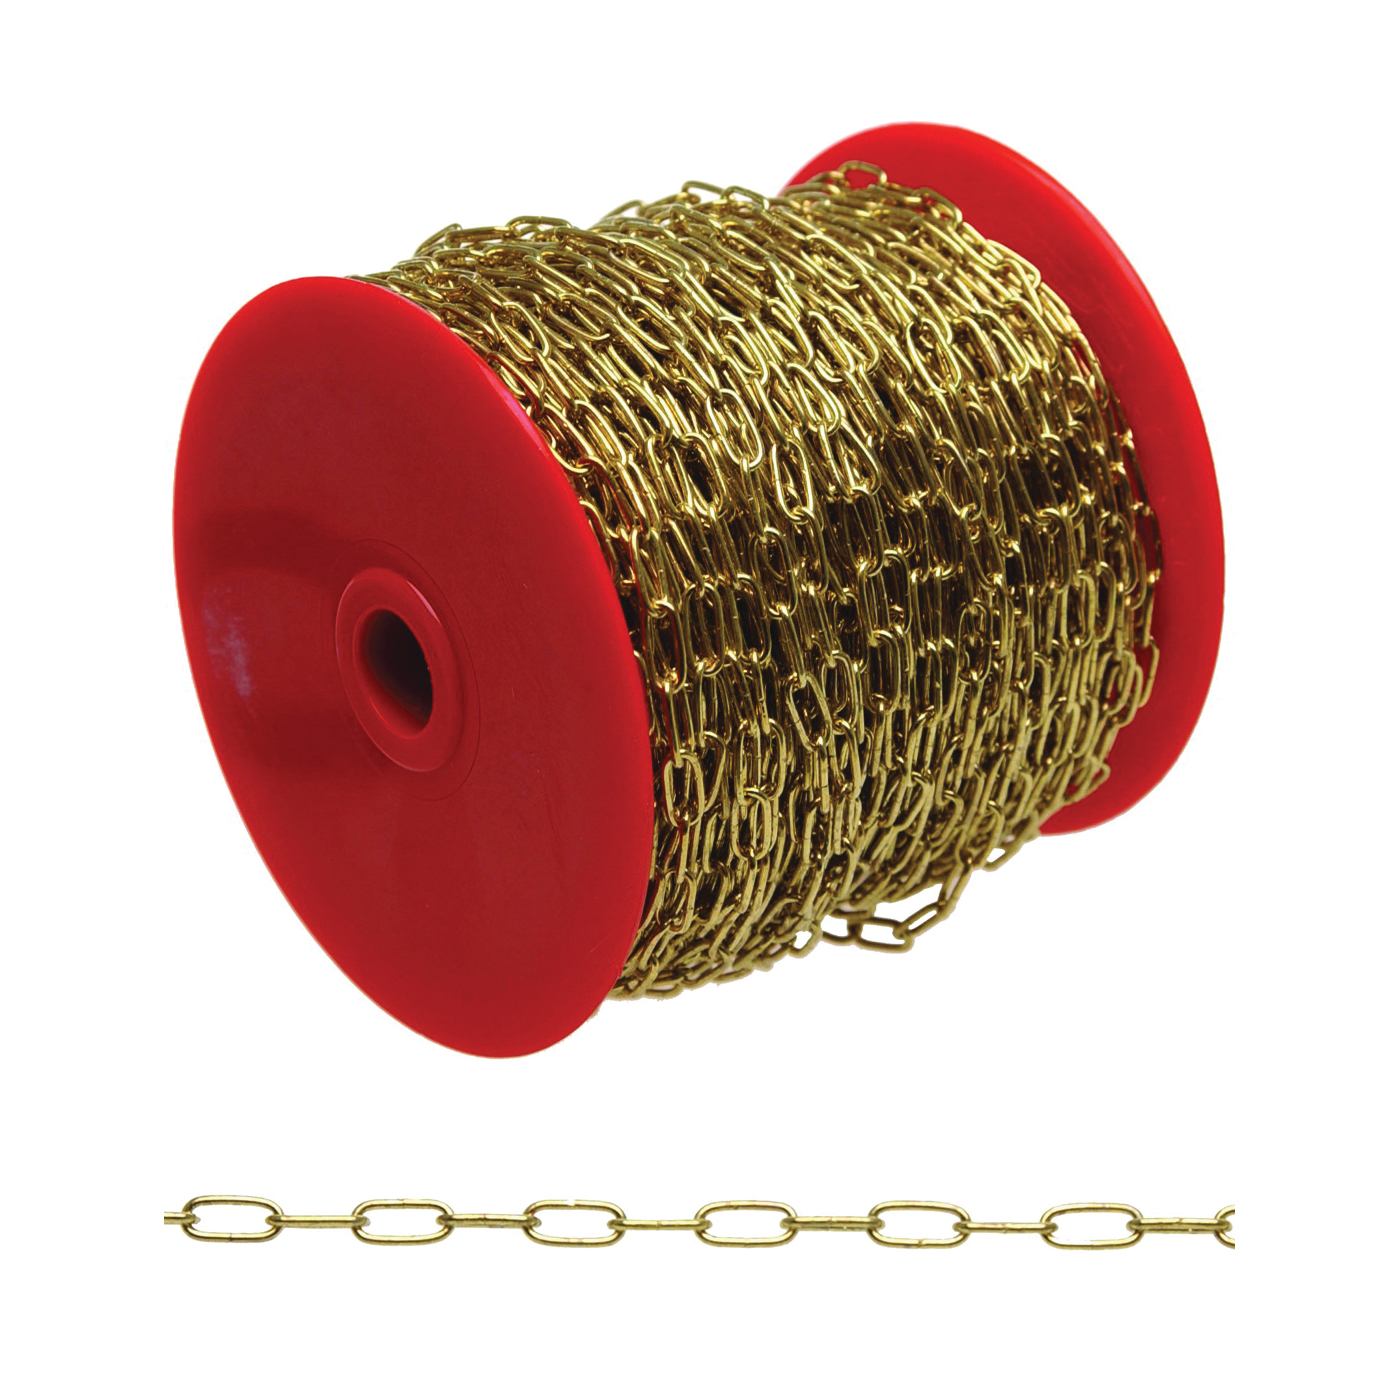 Campbell 0712017 Twist Chain, 200, 12 lb Working Load, Brass - 1